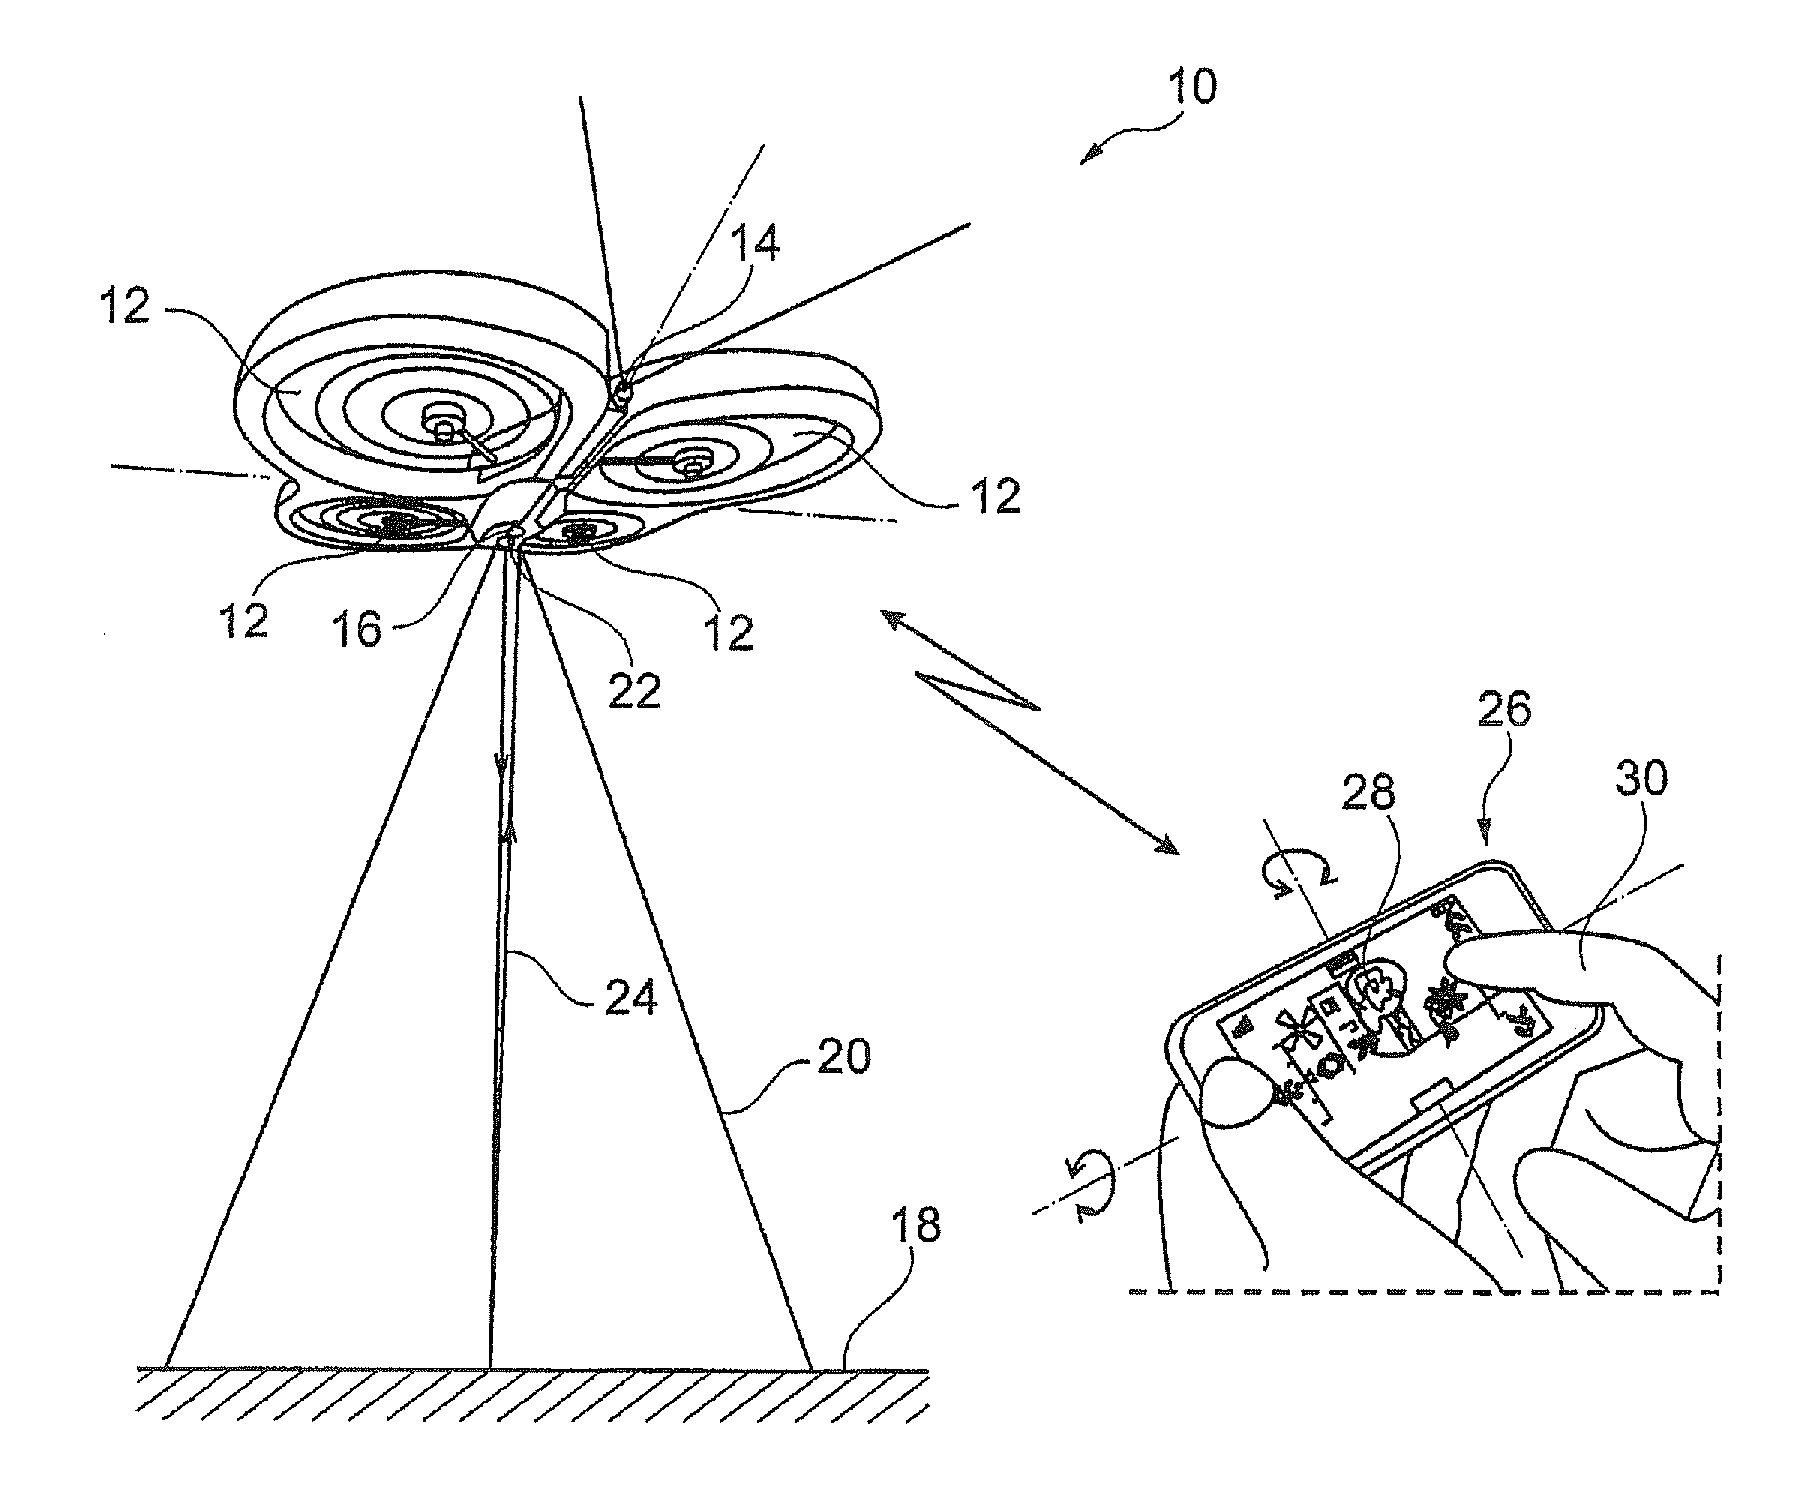 Method of evaluating the horizontal speed of a drone, in particular a drone capable of performing hovering flight under autopilot